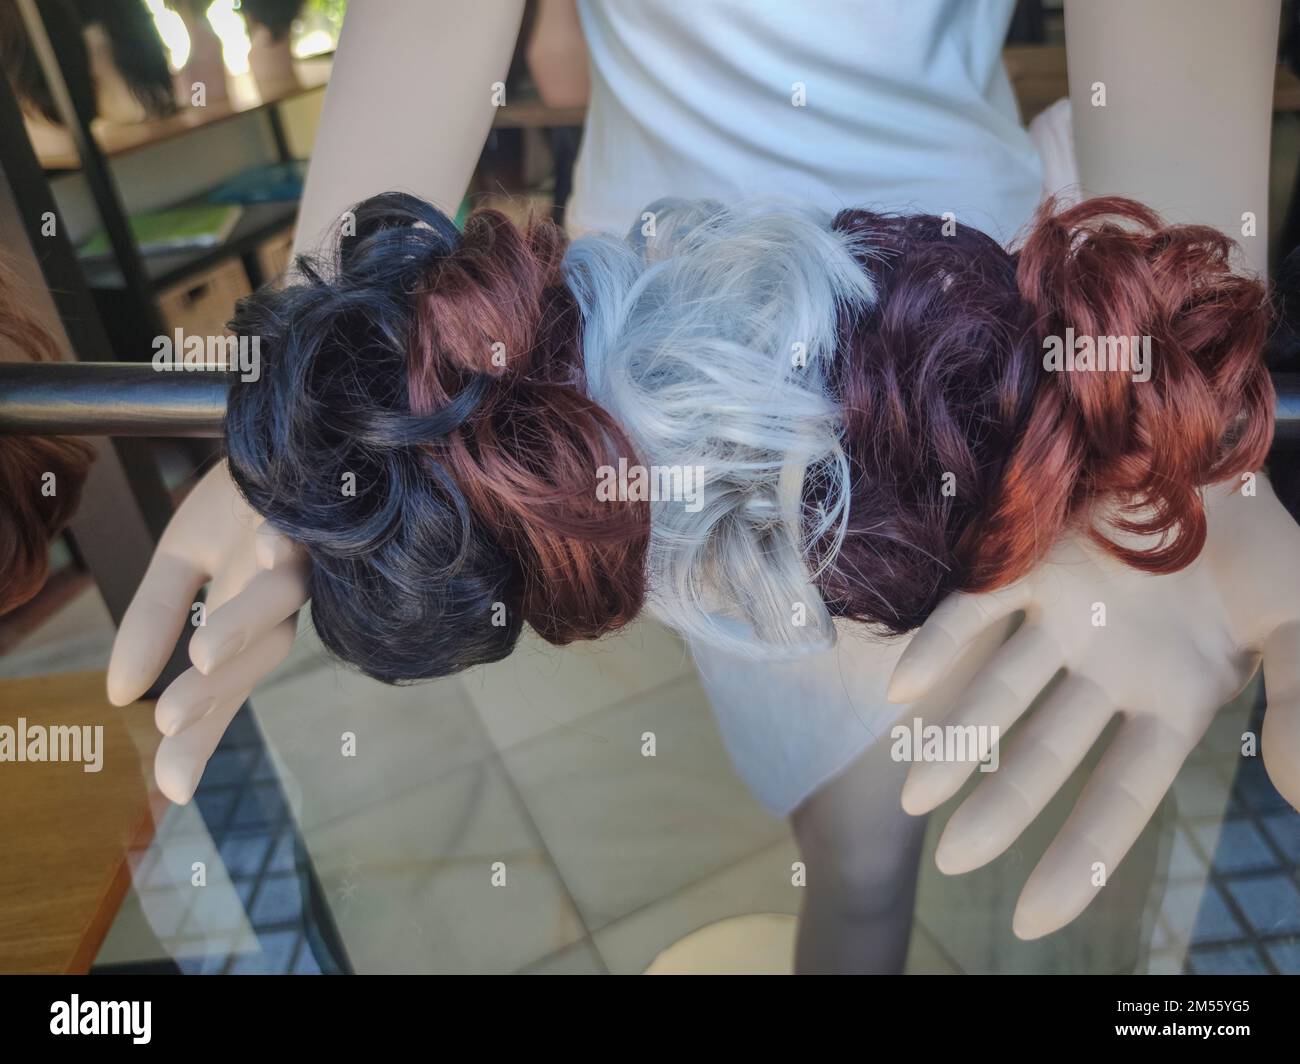 Wigs shop extensions display. Wigs increases the wearers self-confidence and self-esteem Stock Photo